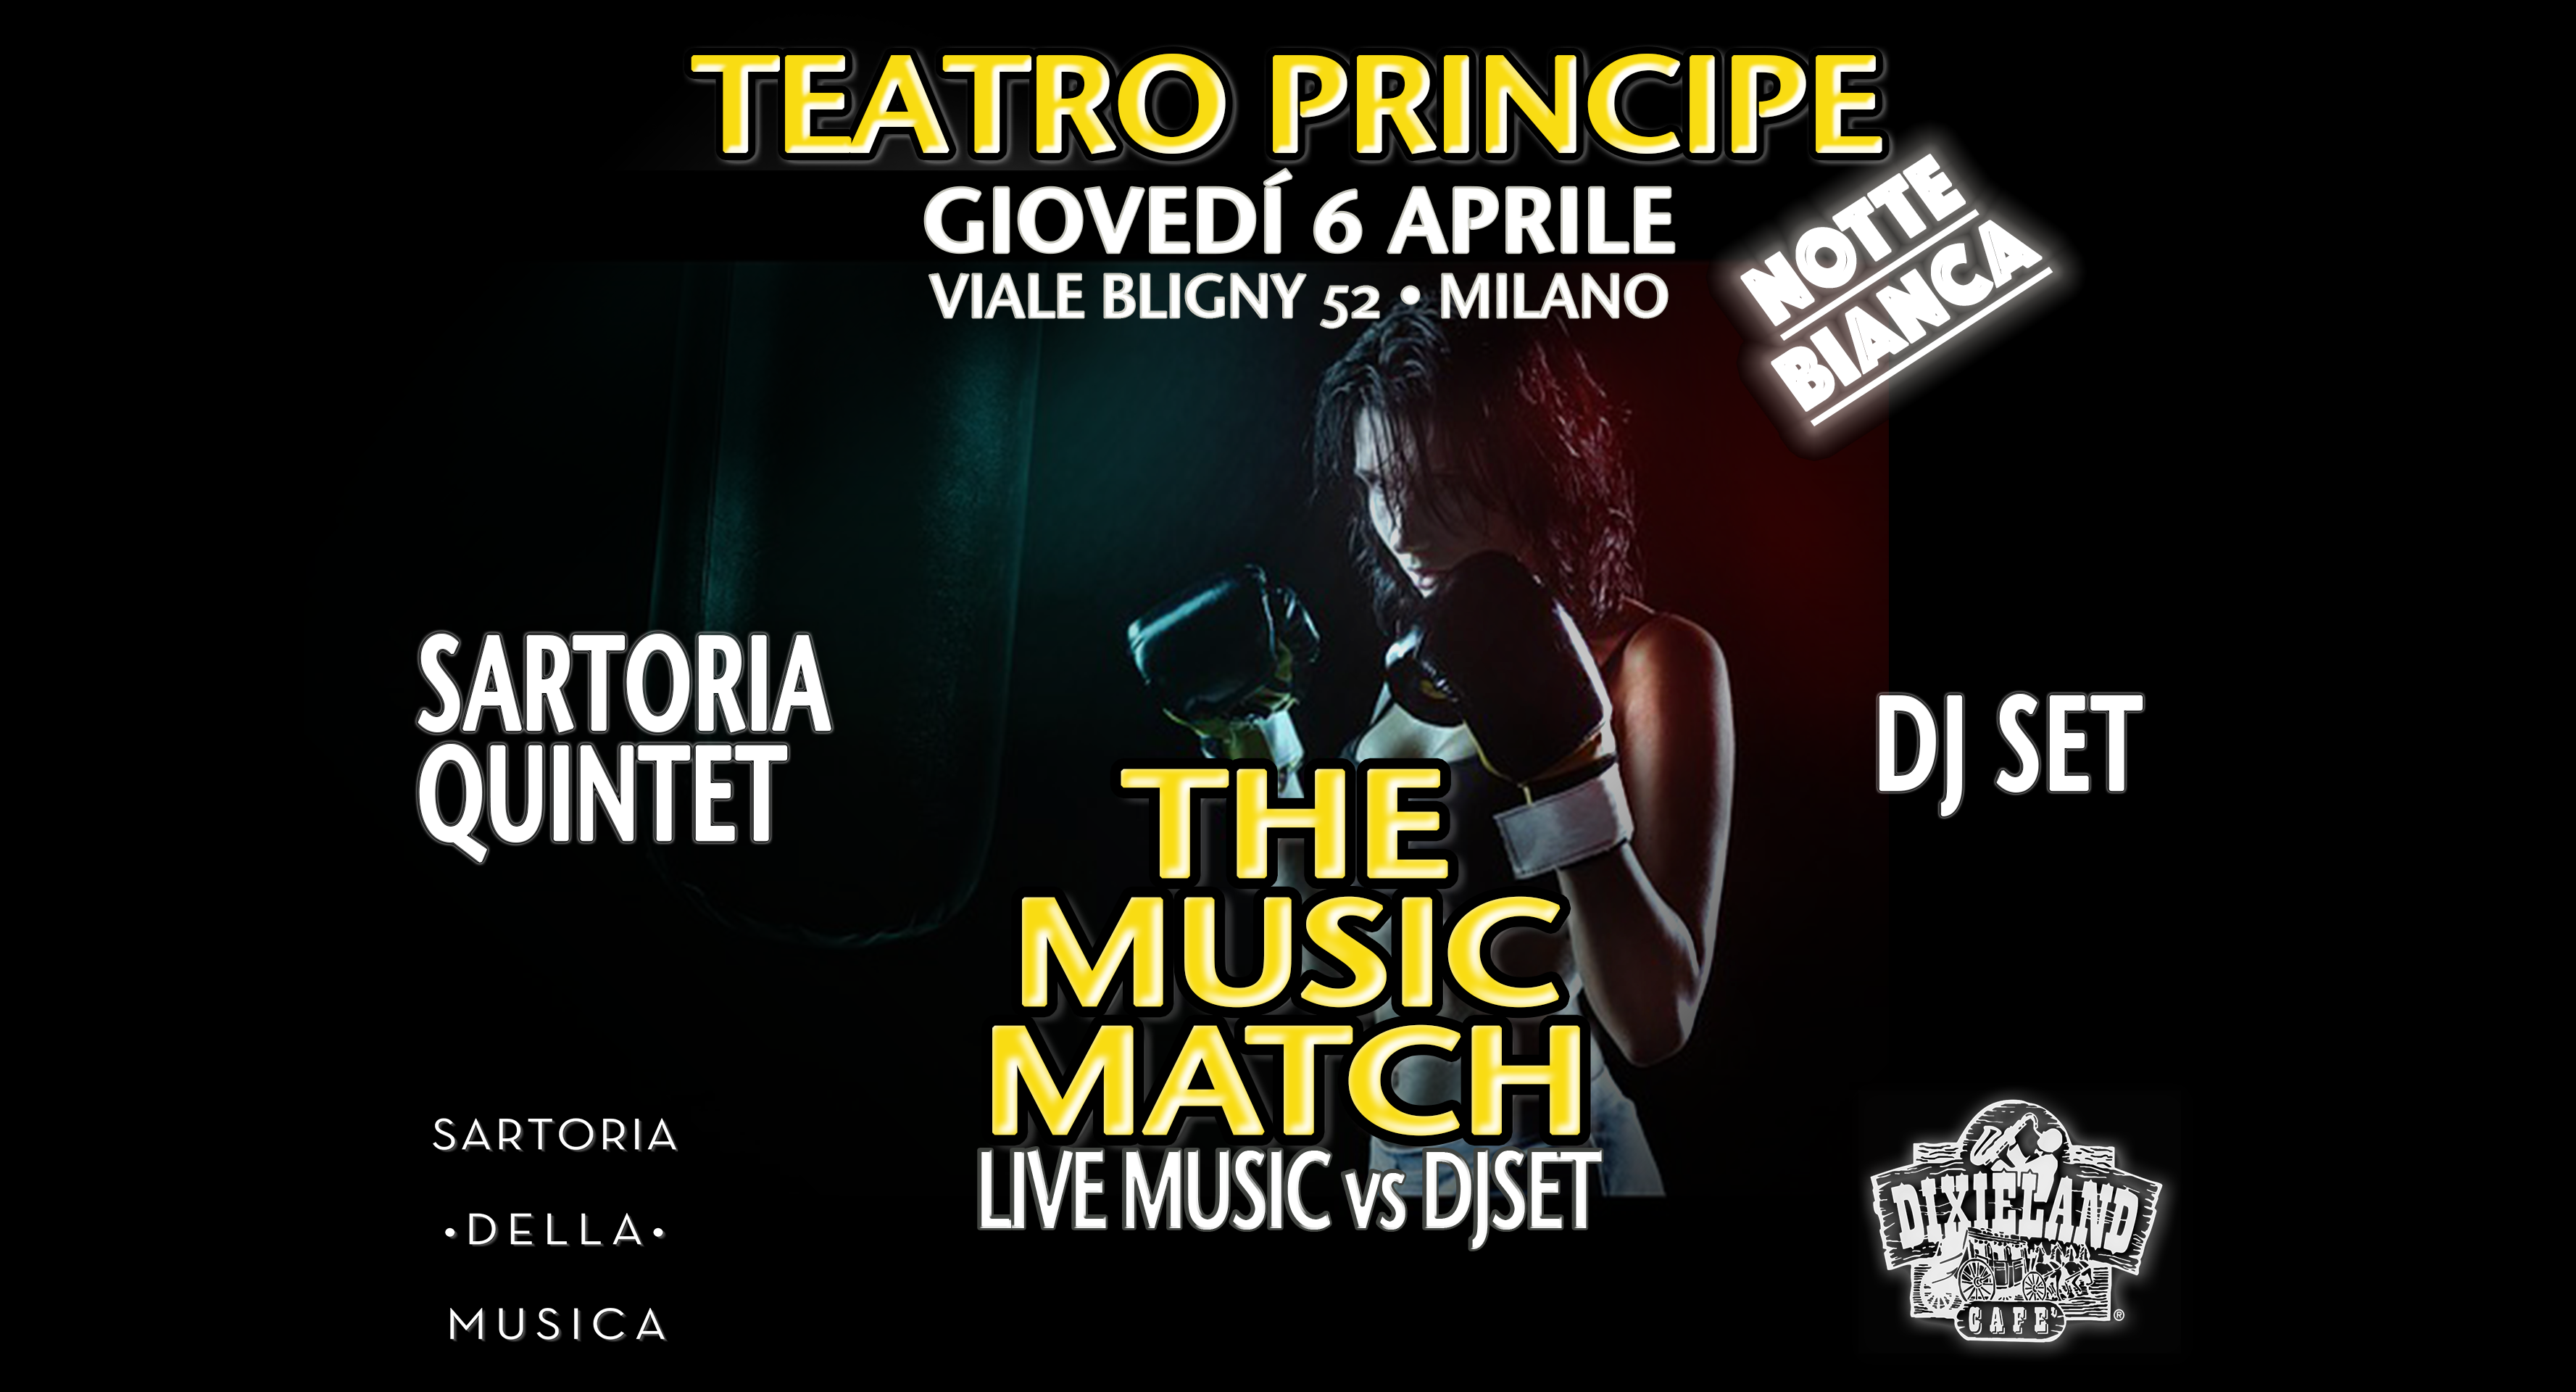 SAVE THE DATE – GIOVEDÌ 6 APRILE